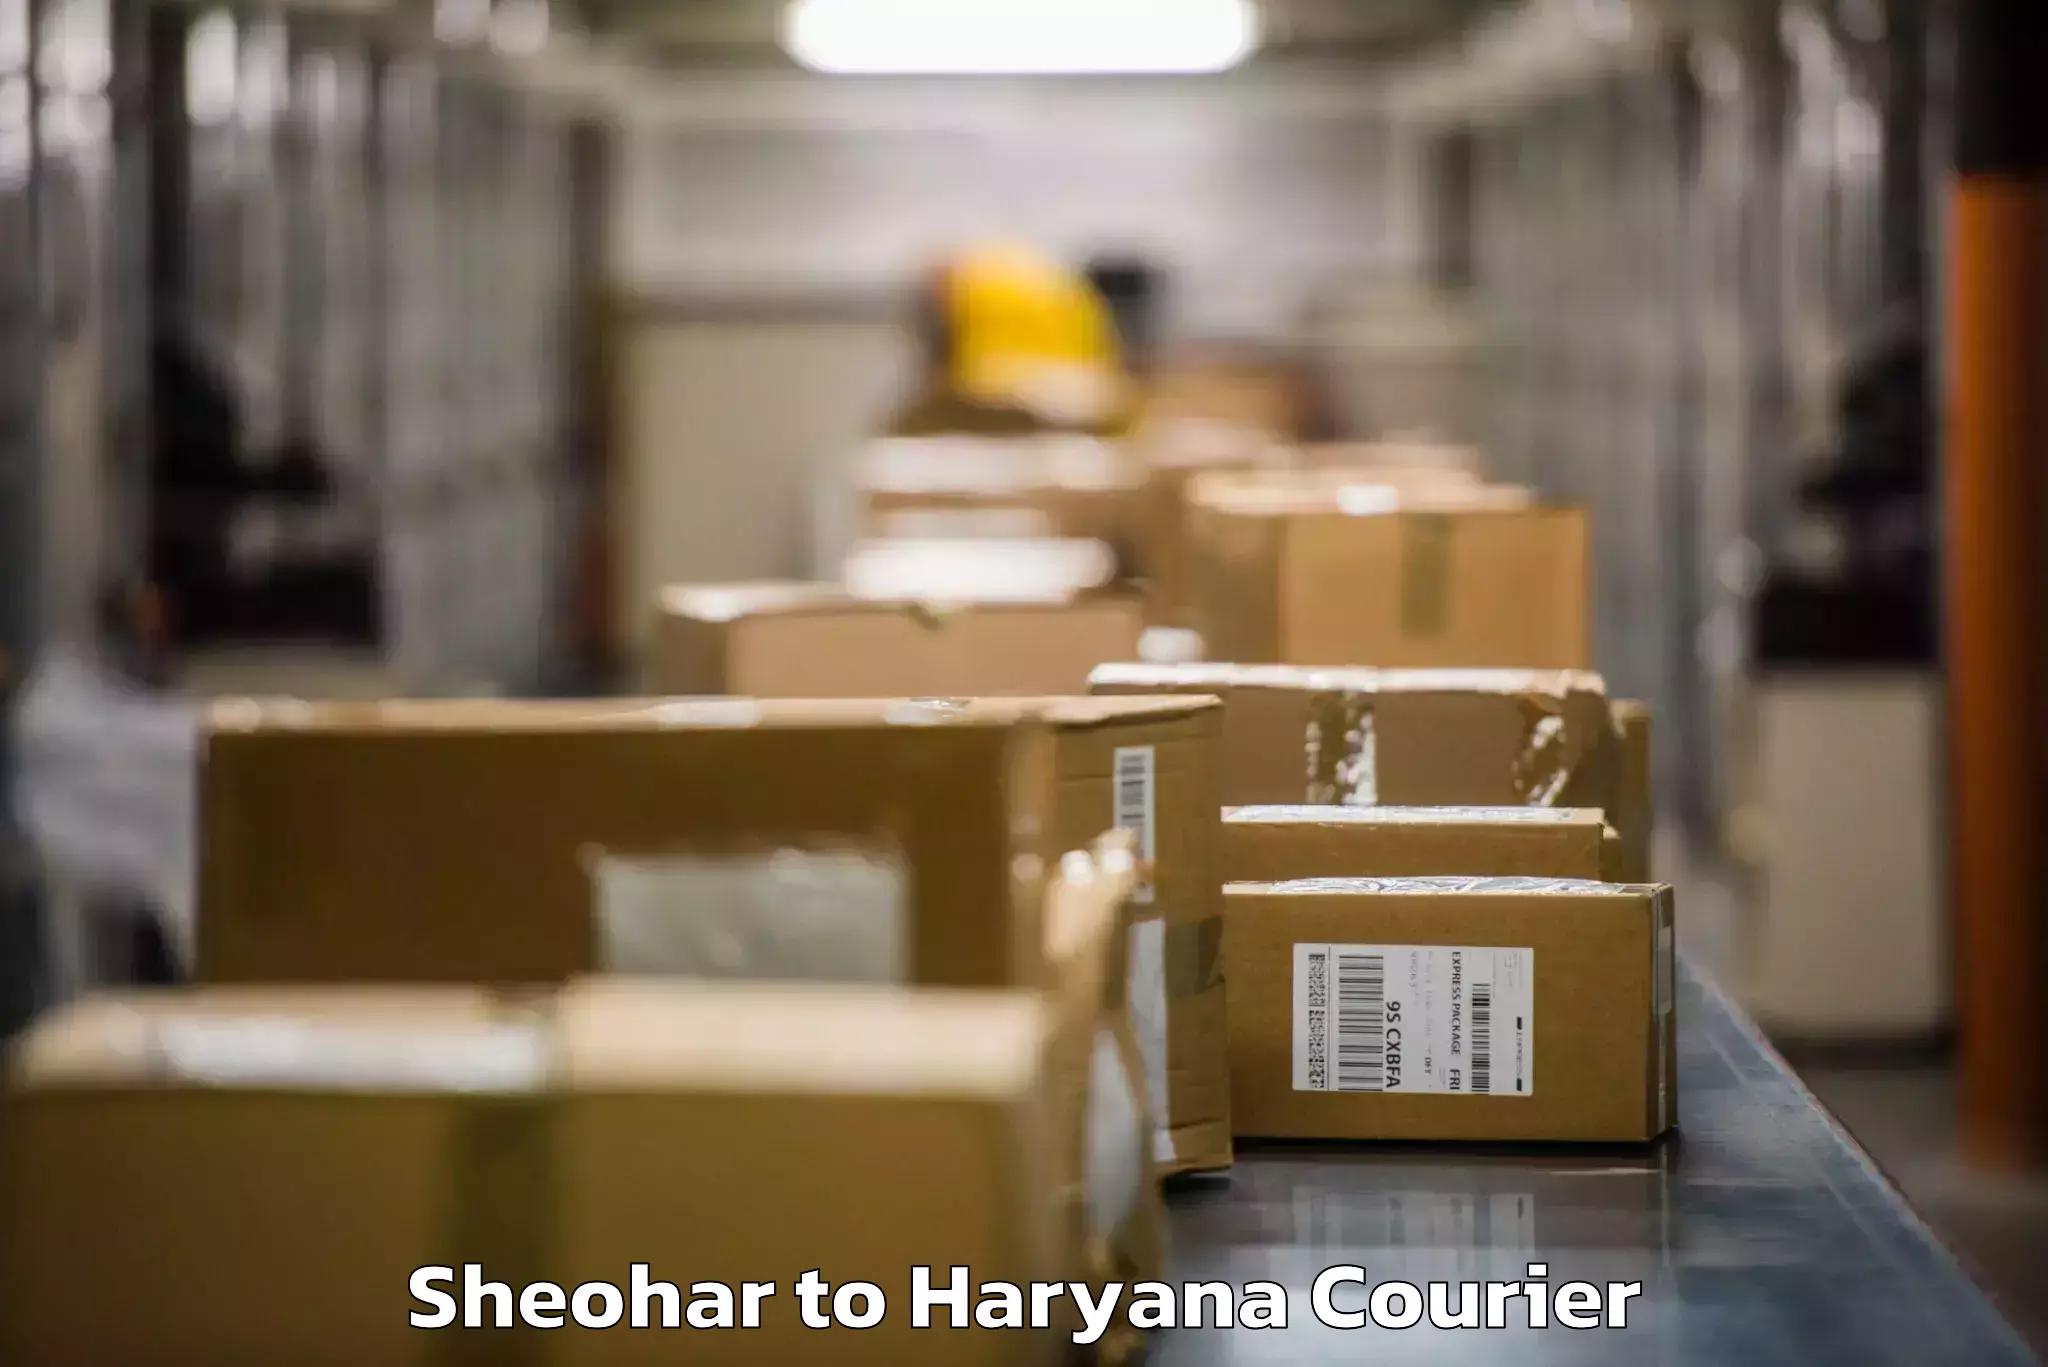 Personal effects shipping Sheohar to Gurgaon